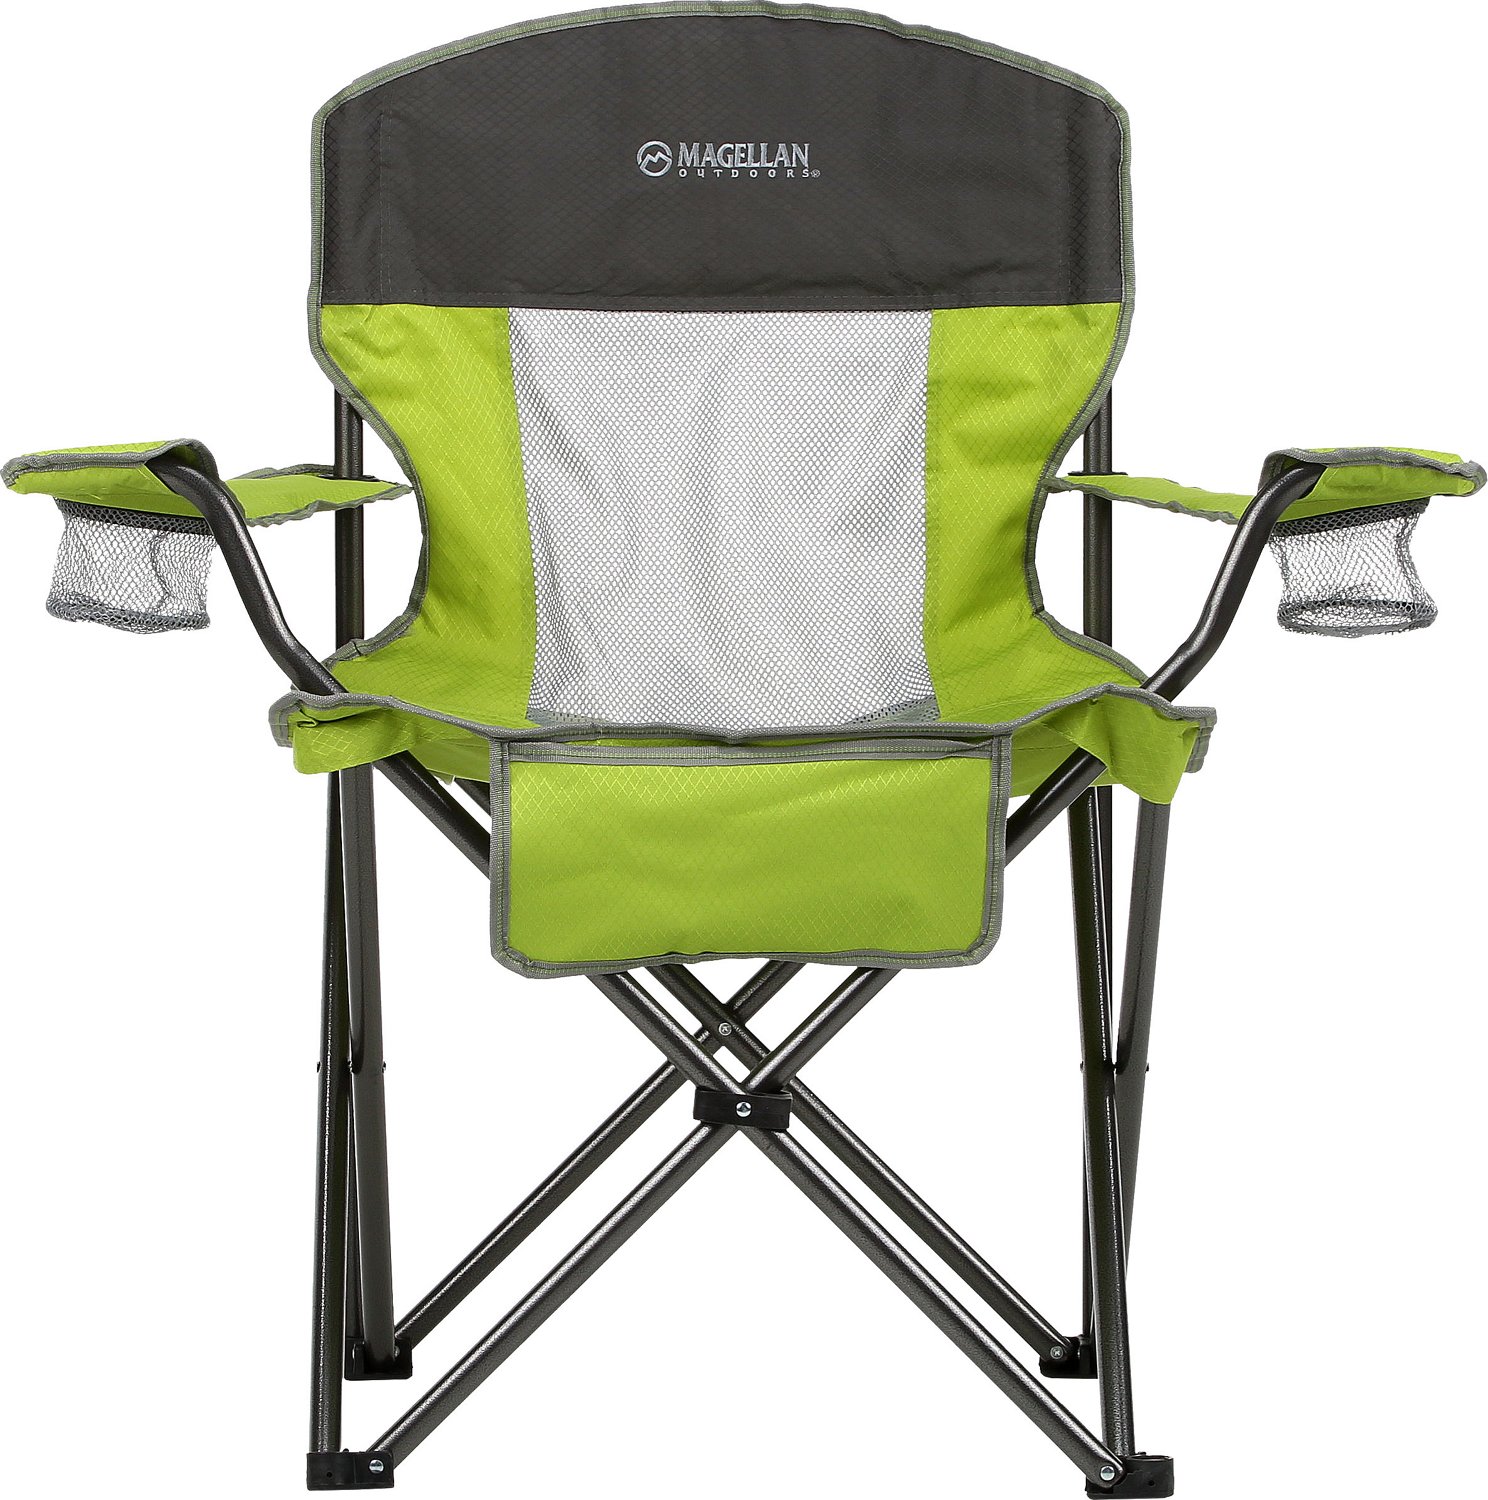 New O Rageous 1 Position Beach Chair for Small Space